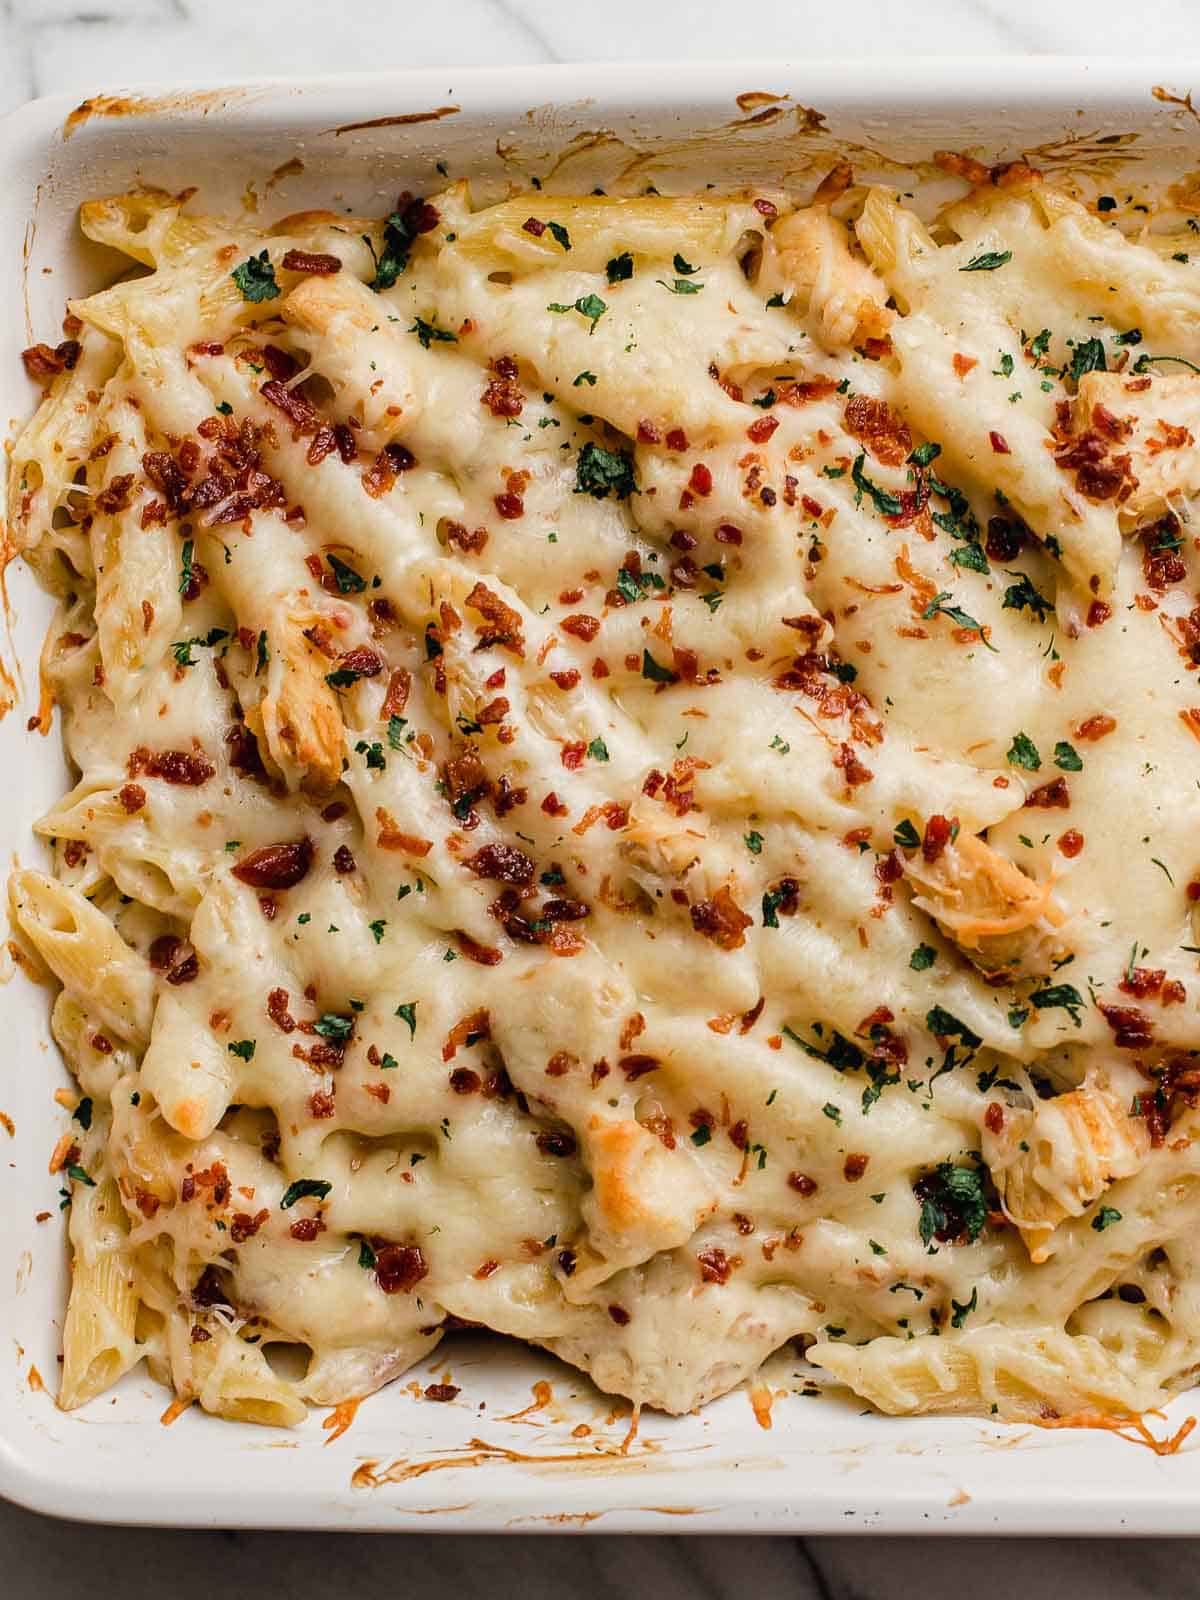 Chicken bacon ranch casserole baked in a dish.